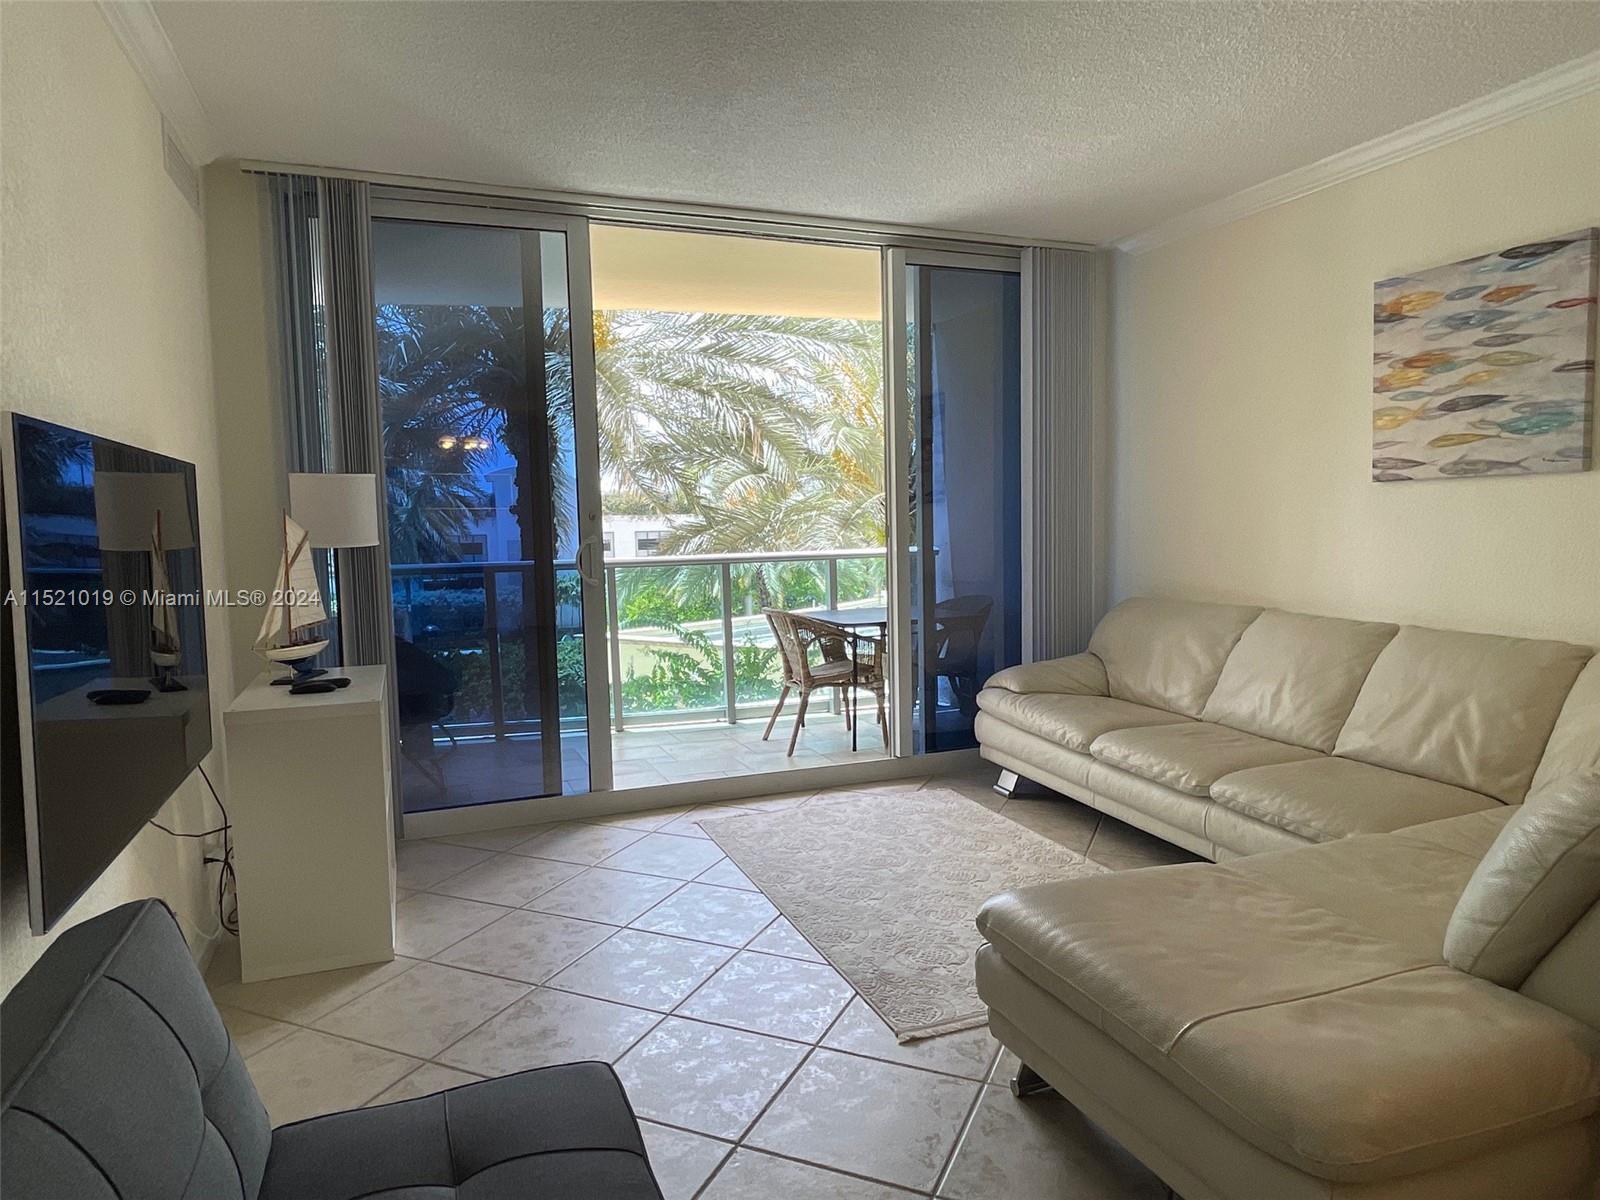 Photo of 2501 S Ocean Dr #328 in Hollywood, FL